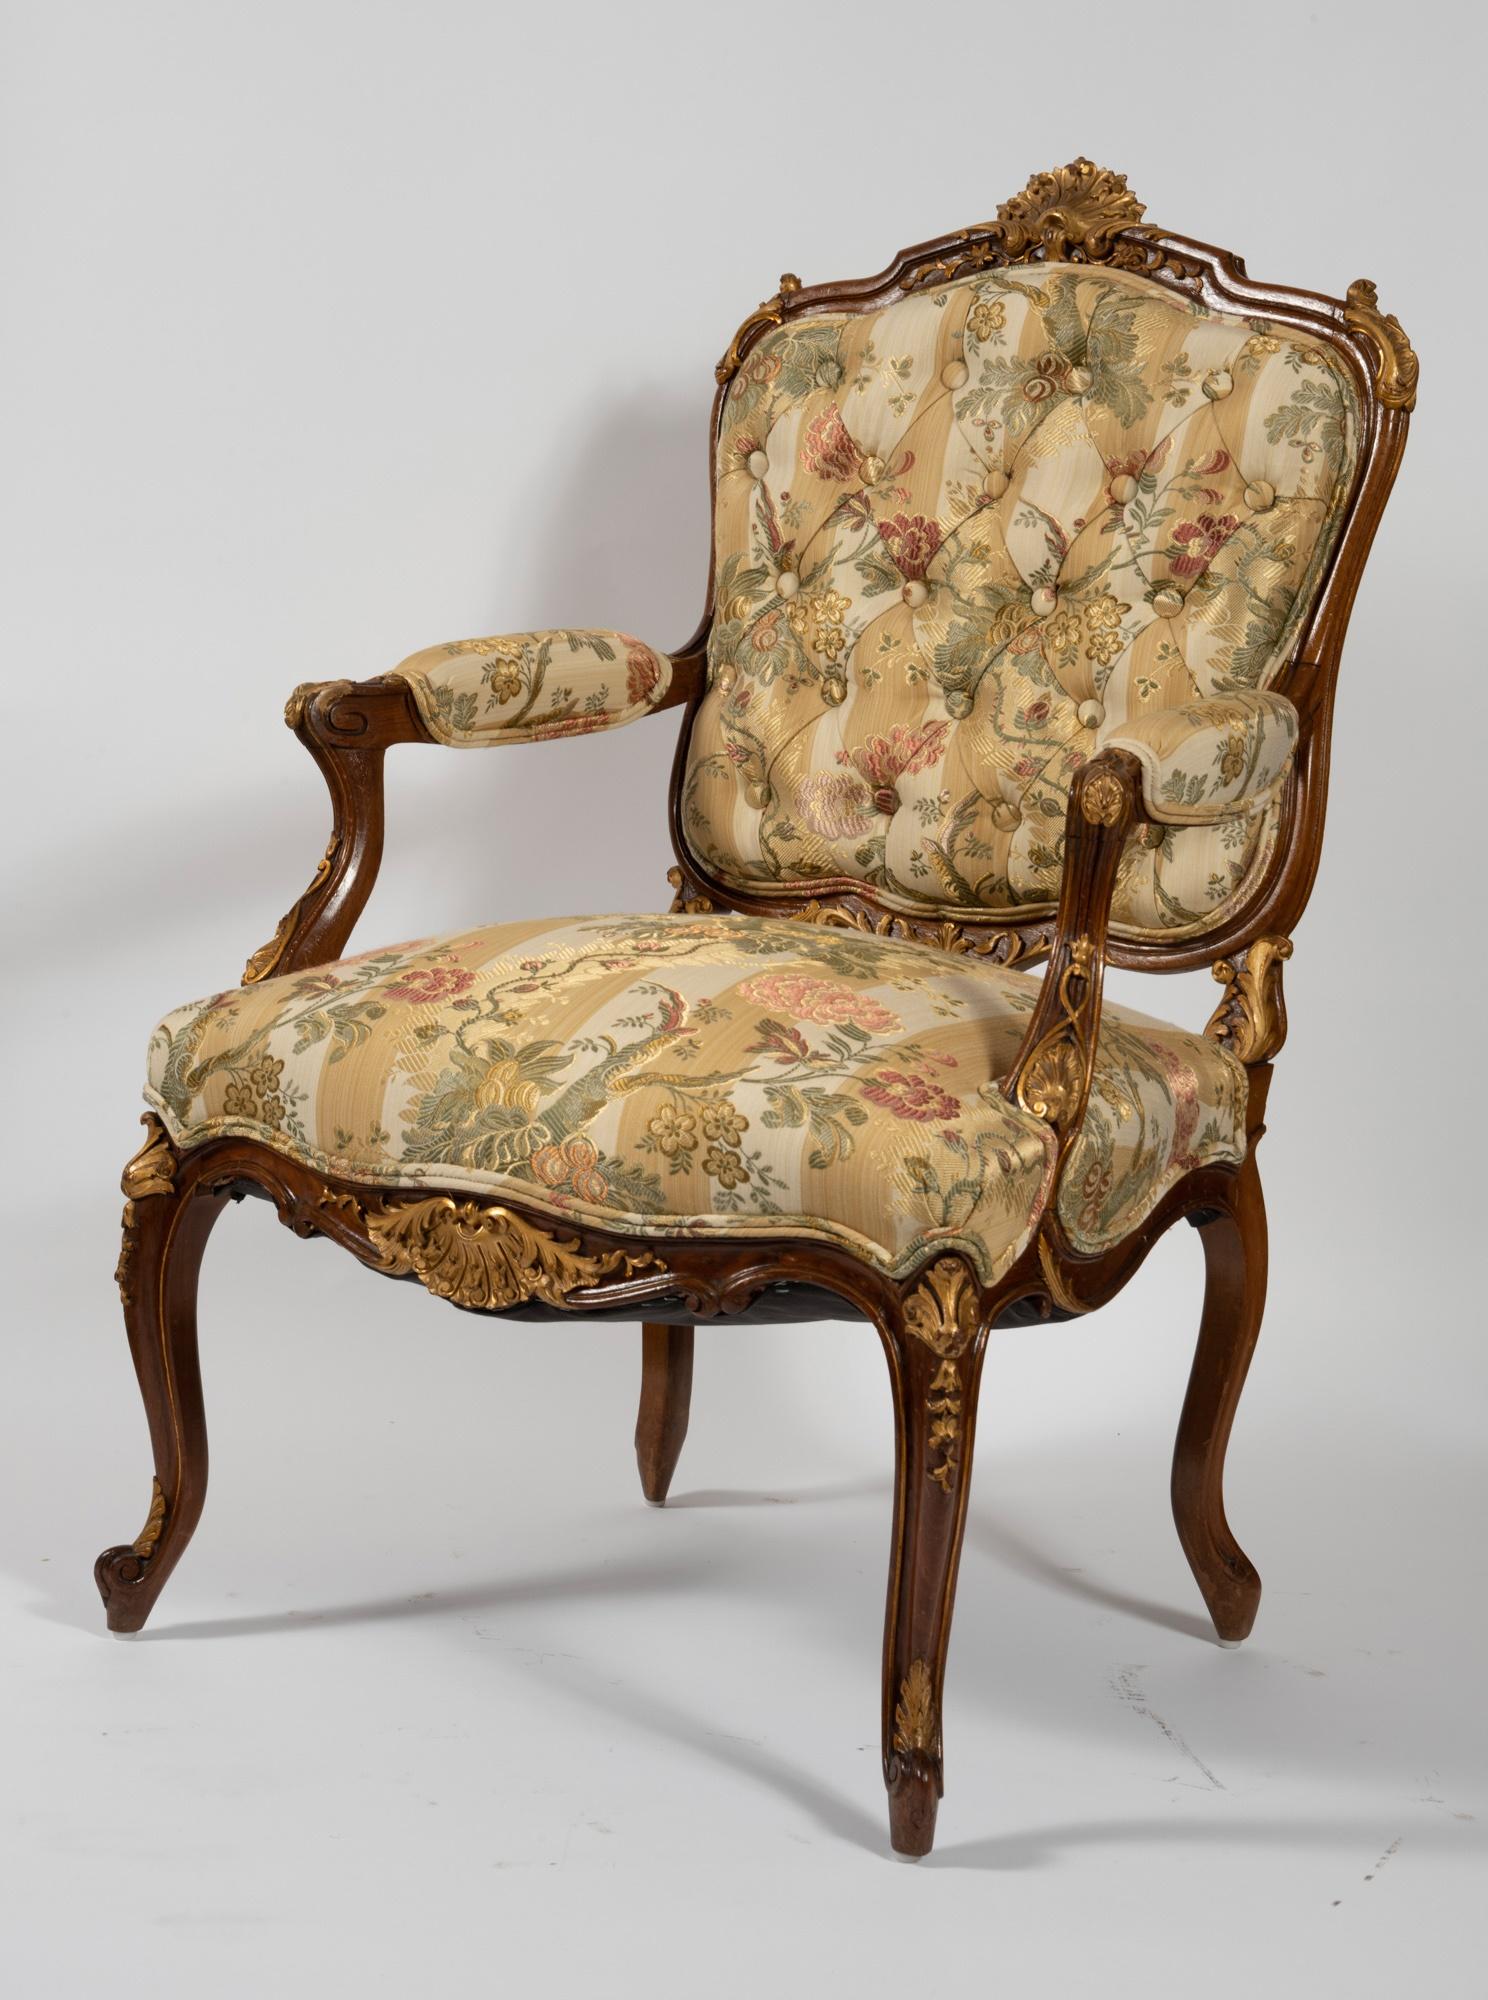 Immerse yourself in the opulence of our exquisite mid 19th-century French Louis XV parcel gilt walnut patinated framed bergères armchairs. This decorative pair showcases unparalleled craftsmanship and timeless design, making them a statement piece